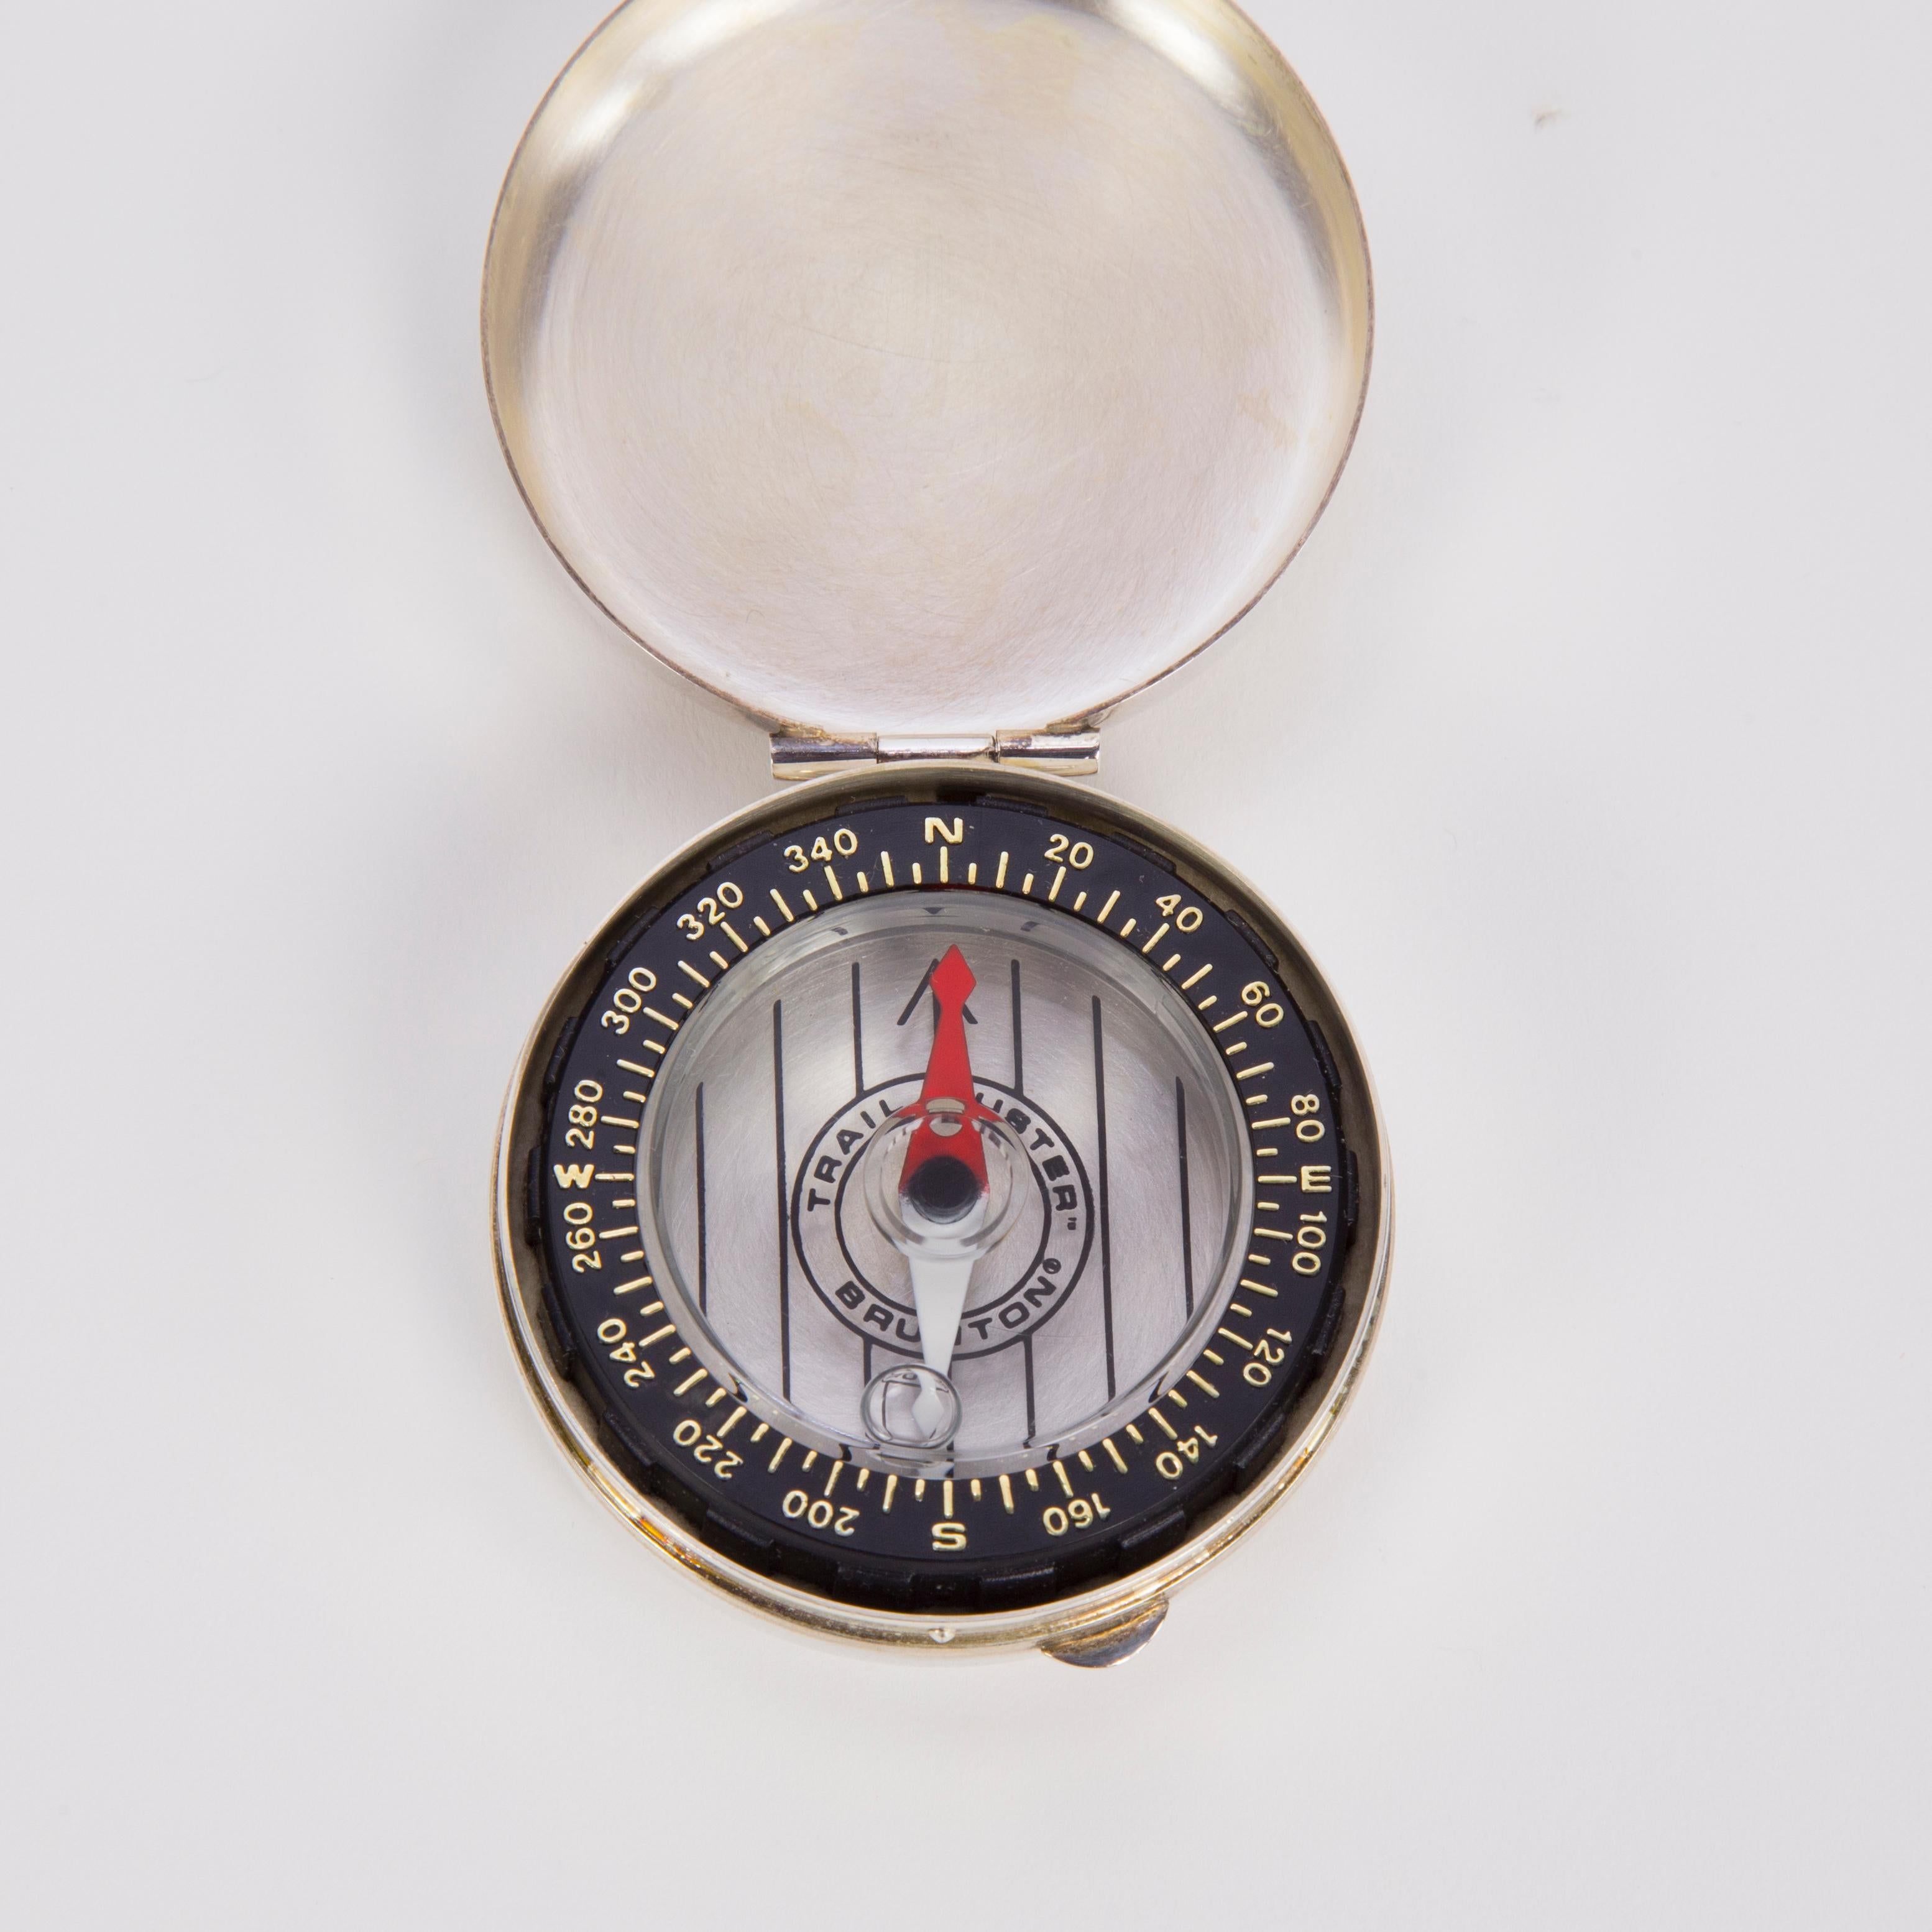 Classic sterling silver circular compass; approx. 2” diameter; convenient thumb grip opening. We offer complimentary Initial or Monogram engraving. In your pocket or on the go!
    